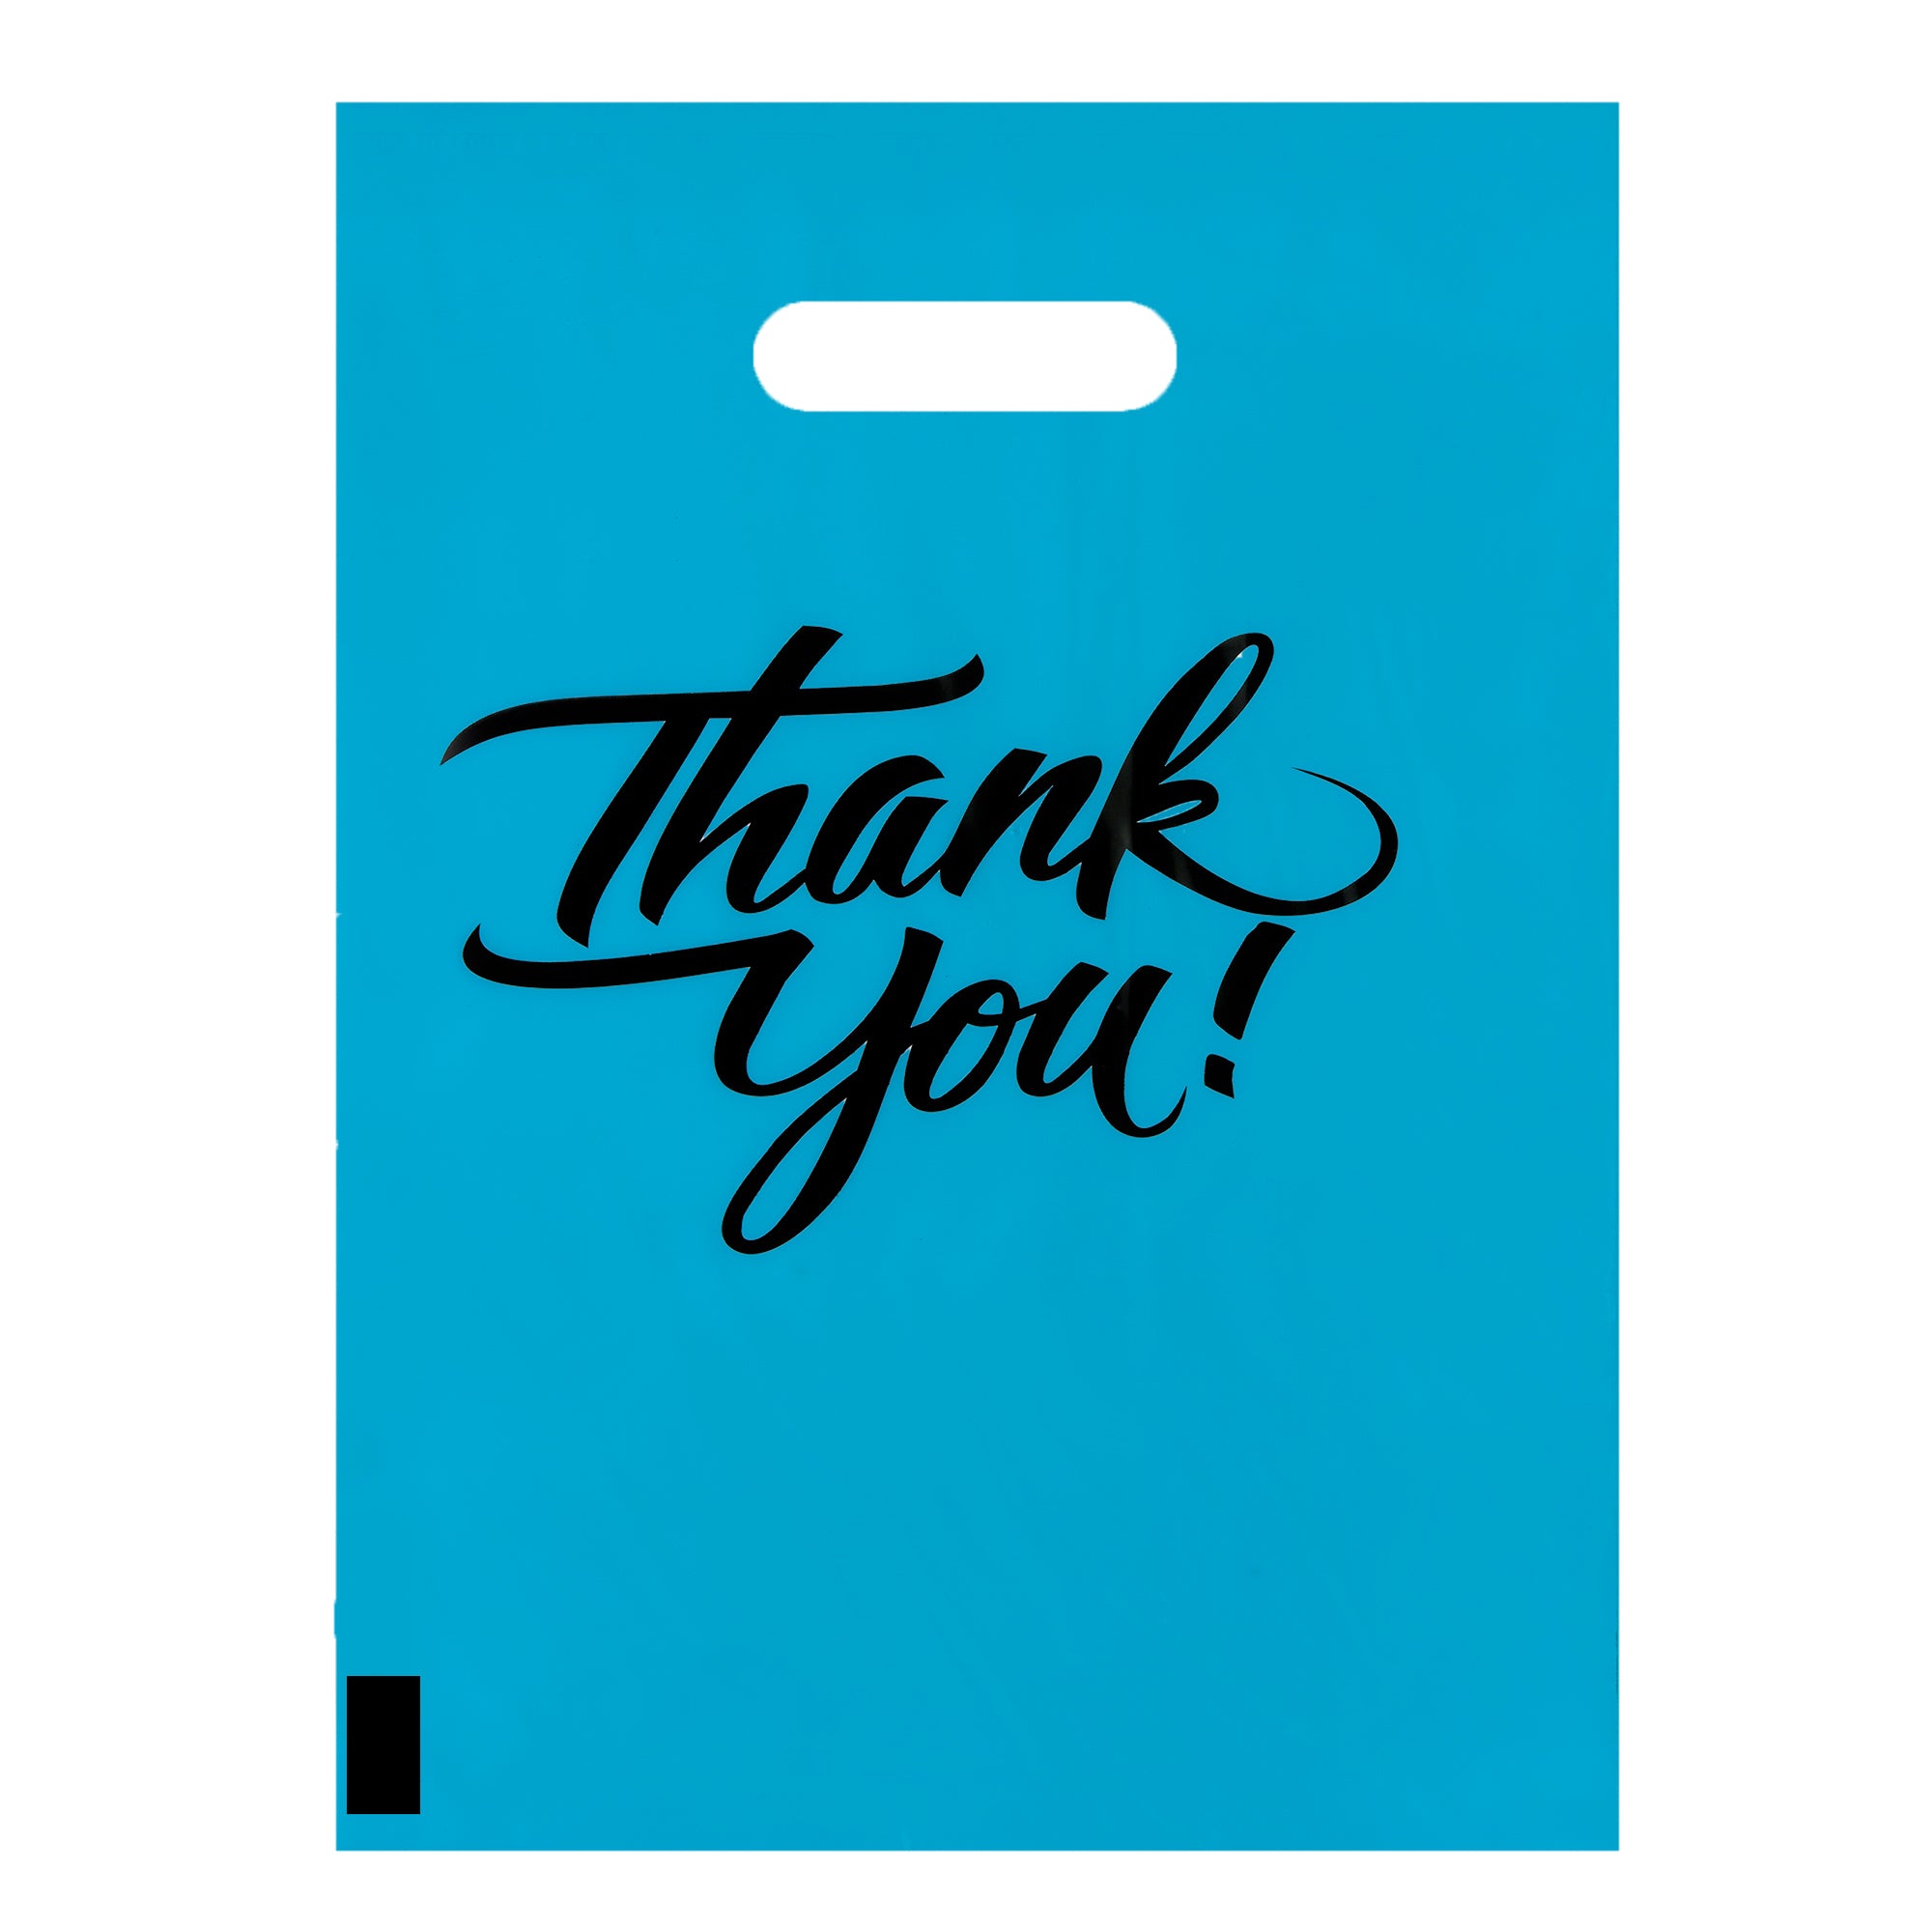 Infinitepack 100 Pieces Thank You Merchandise Bags, Die Cut Handles, Retail Shopping Bags for Boutique, Goodie Bags, Gift Bags Bulk, Favors, Reusable